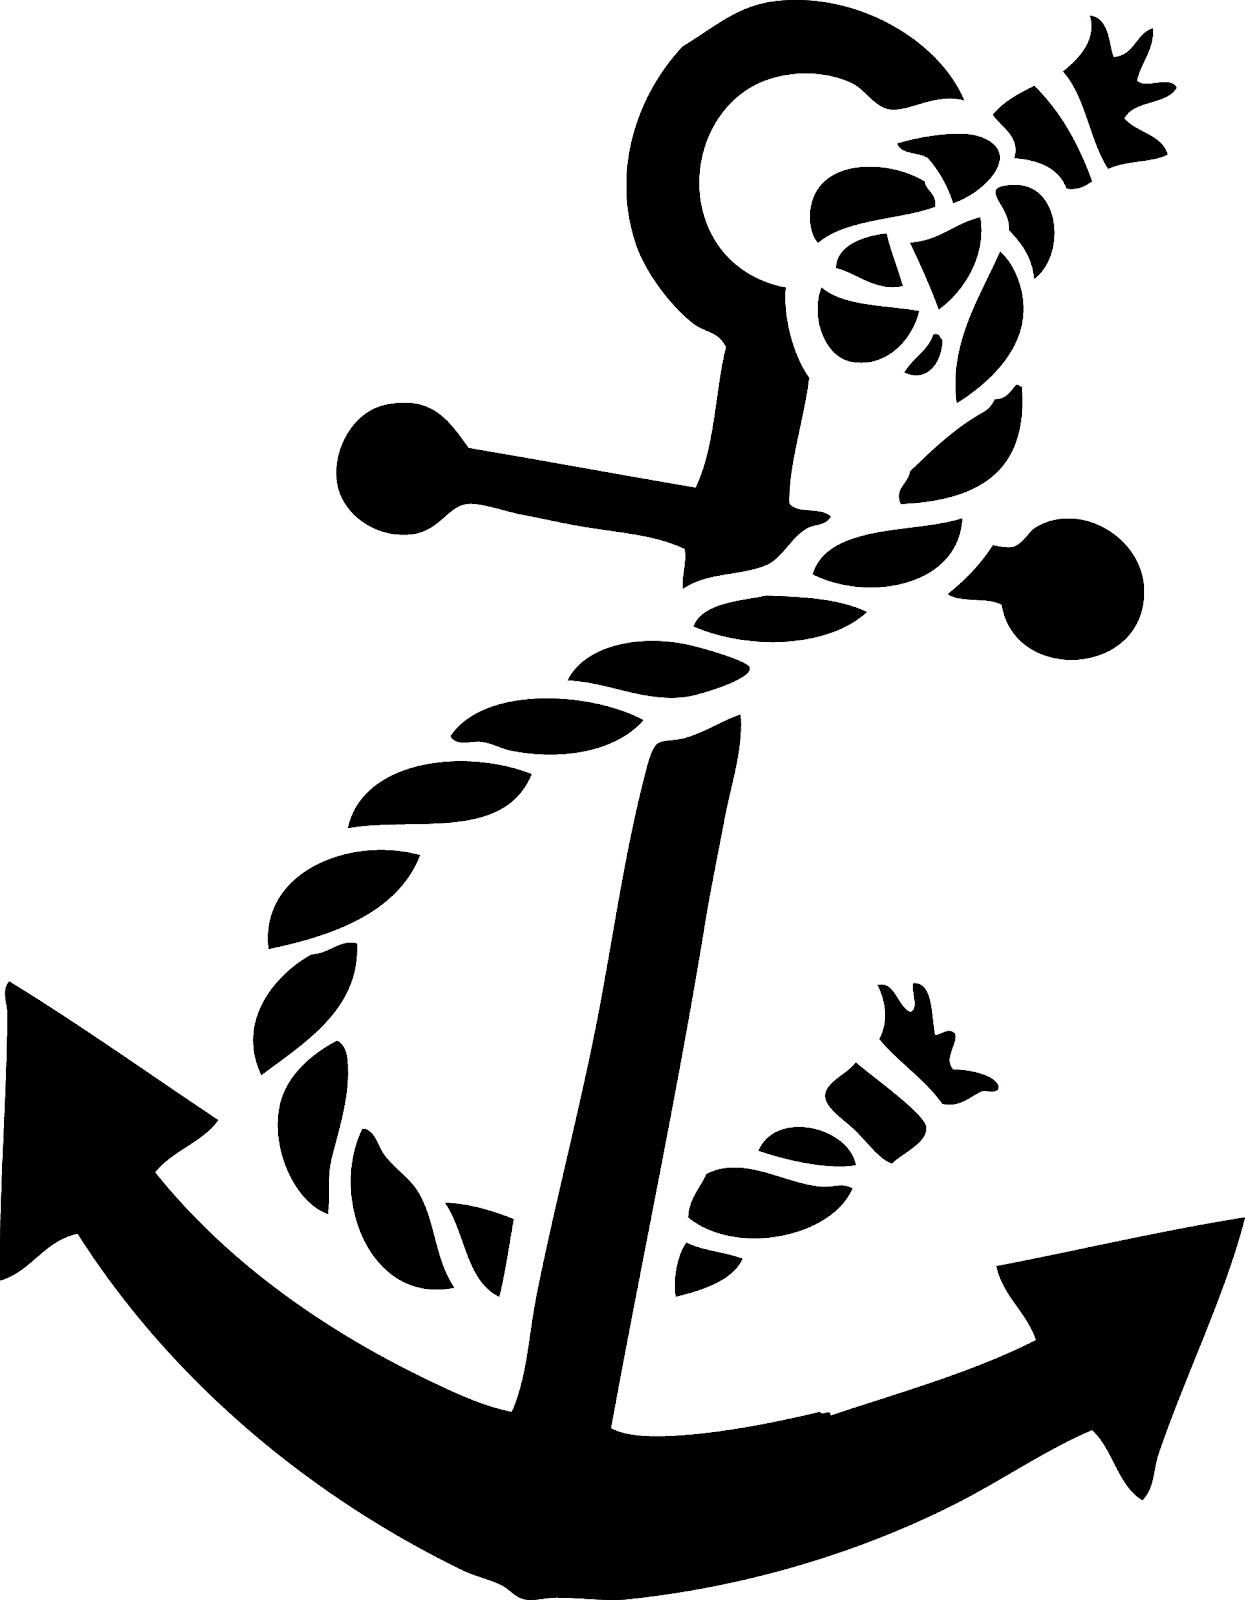 Anchor Free Images at vector clip art online